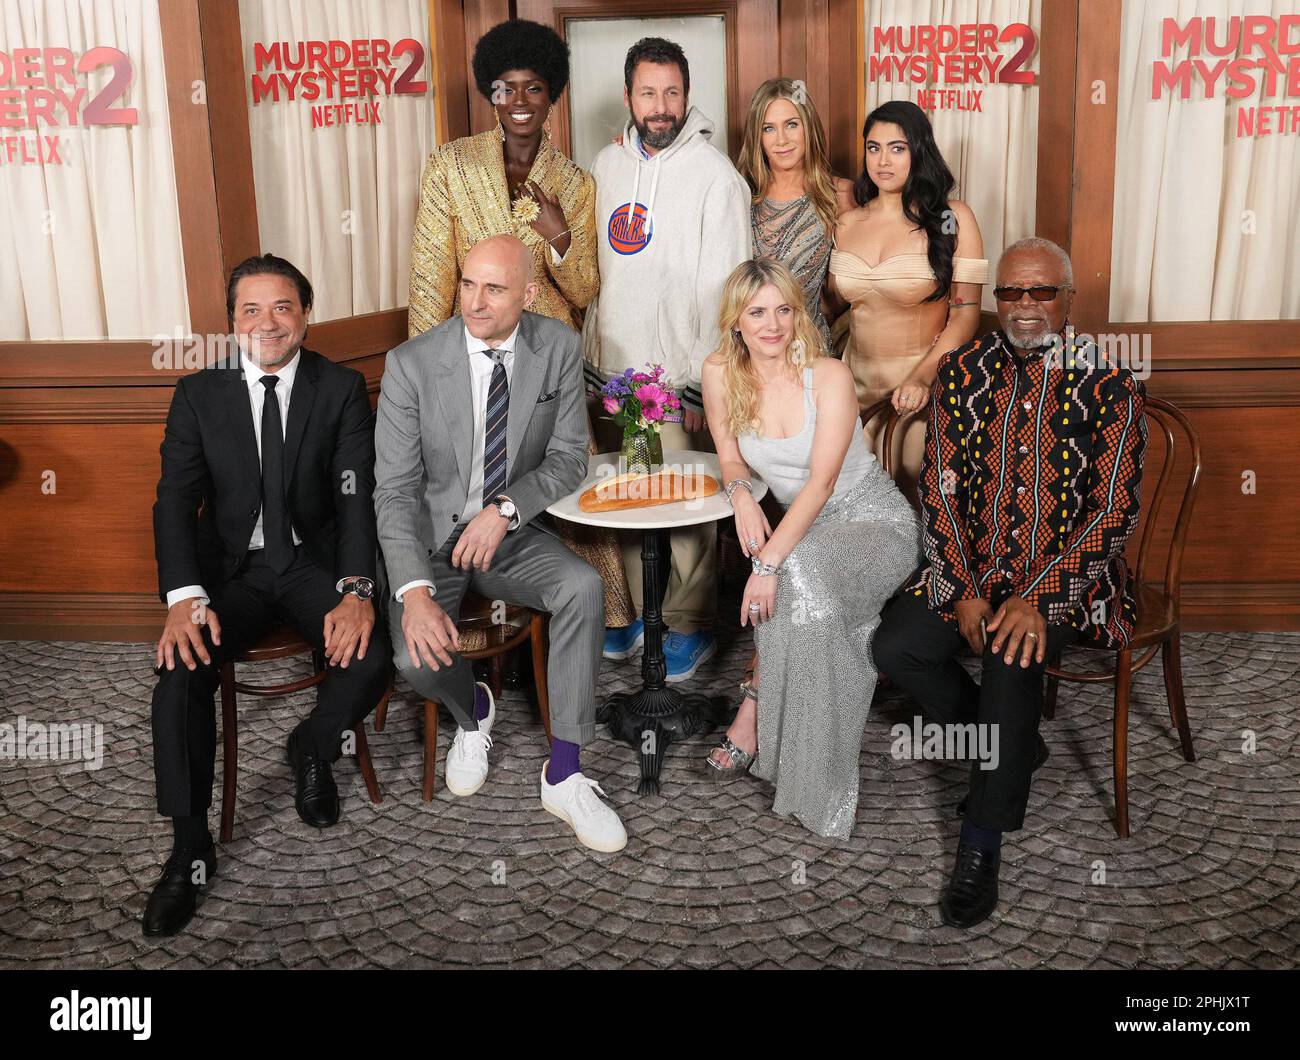 Los Angeles, USA. 28th Mar, 2023. (L-R) MURDER MYSTERY 2 Cast - Enrique Arce, Jodie Turner-Smith, Mark Strong, Adam Sandler, Jennifer Aniston, Mélanie Laurent, Kuhoo Verma and Dr. John Kani at the Netflix's MURDER MYSTERY 2 Los Angeles Premiere held at the Regency Village Theater in Westwood, CA on Tuesday, ?March 28, 2023. (Photo By Sthanlee B. Mirador/Sipa USA) Credit: Sipa USA/Alamy Live News Stock Photo